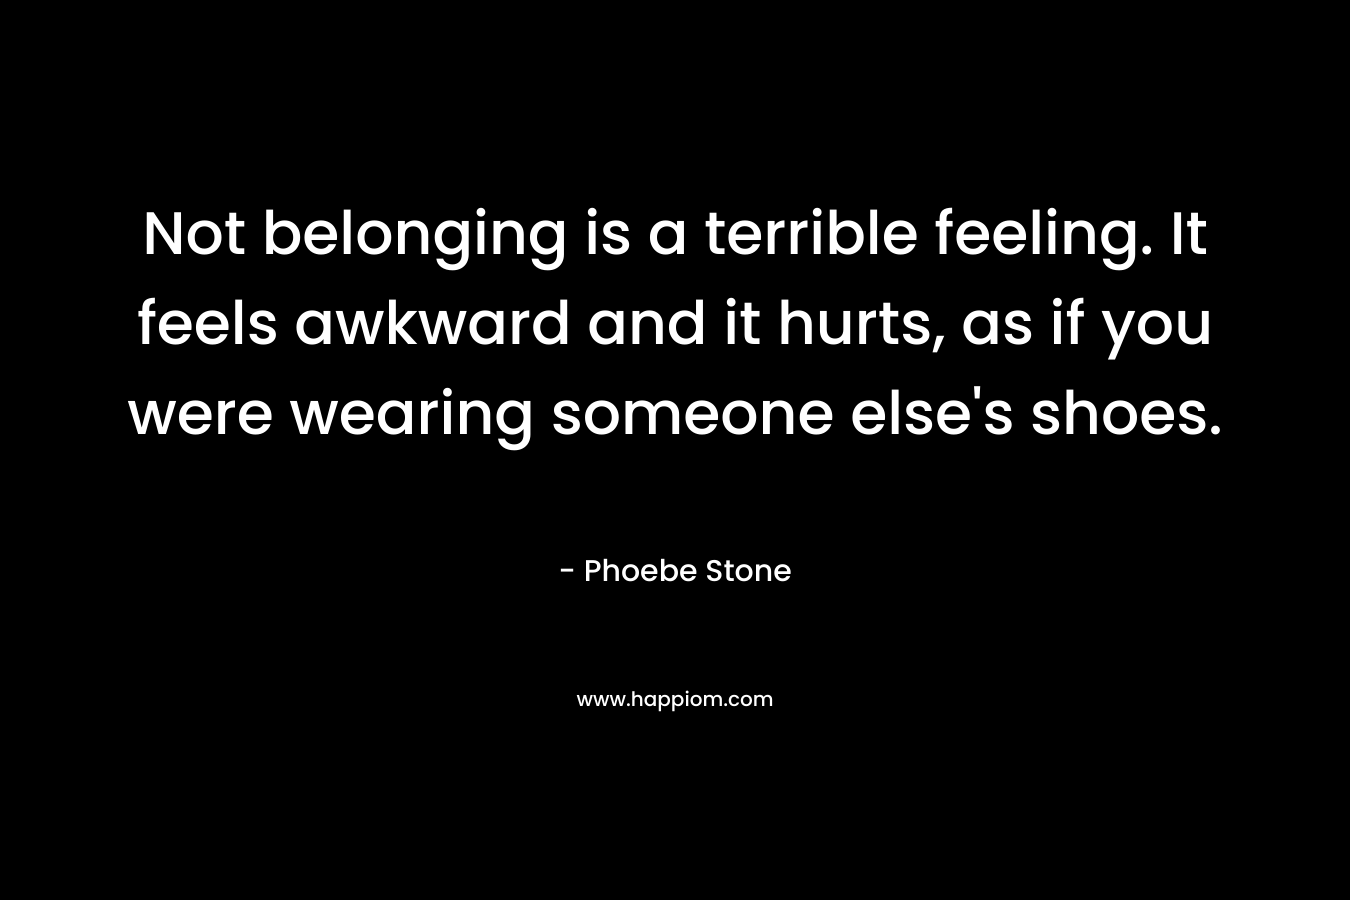 Not belonging is a terrible feeling. It feels awkward and it hurts, as if you were wearing someone else's shoes.